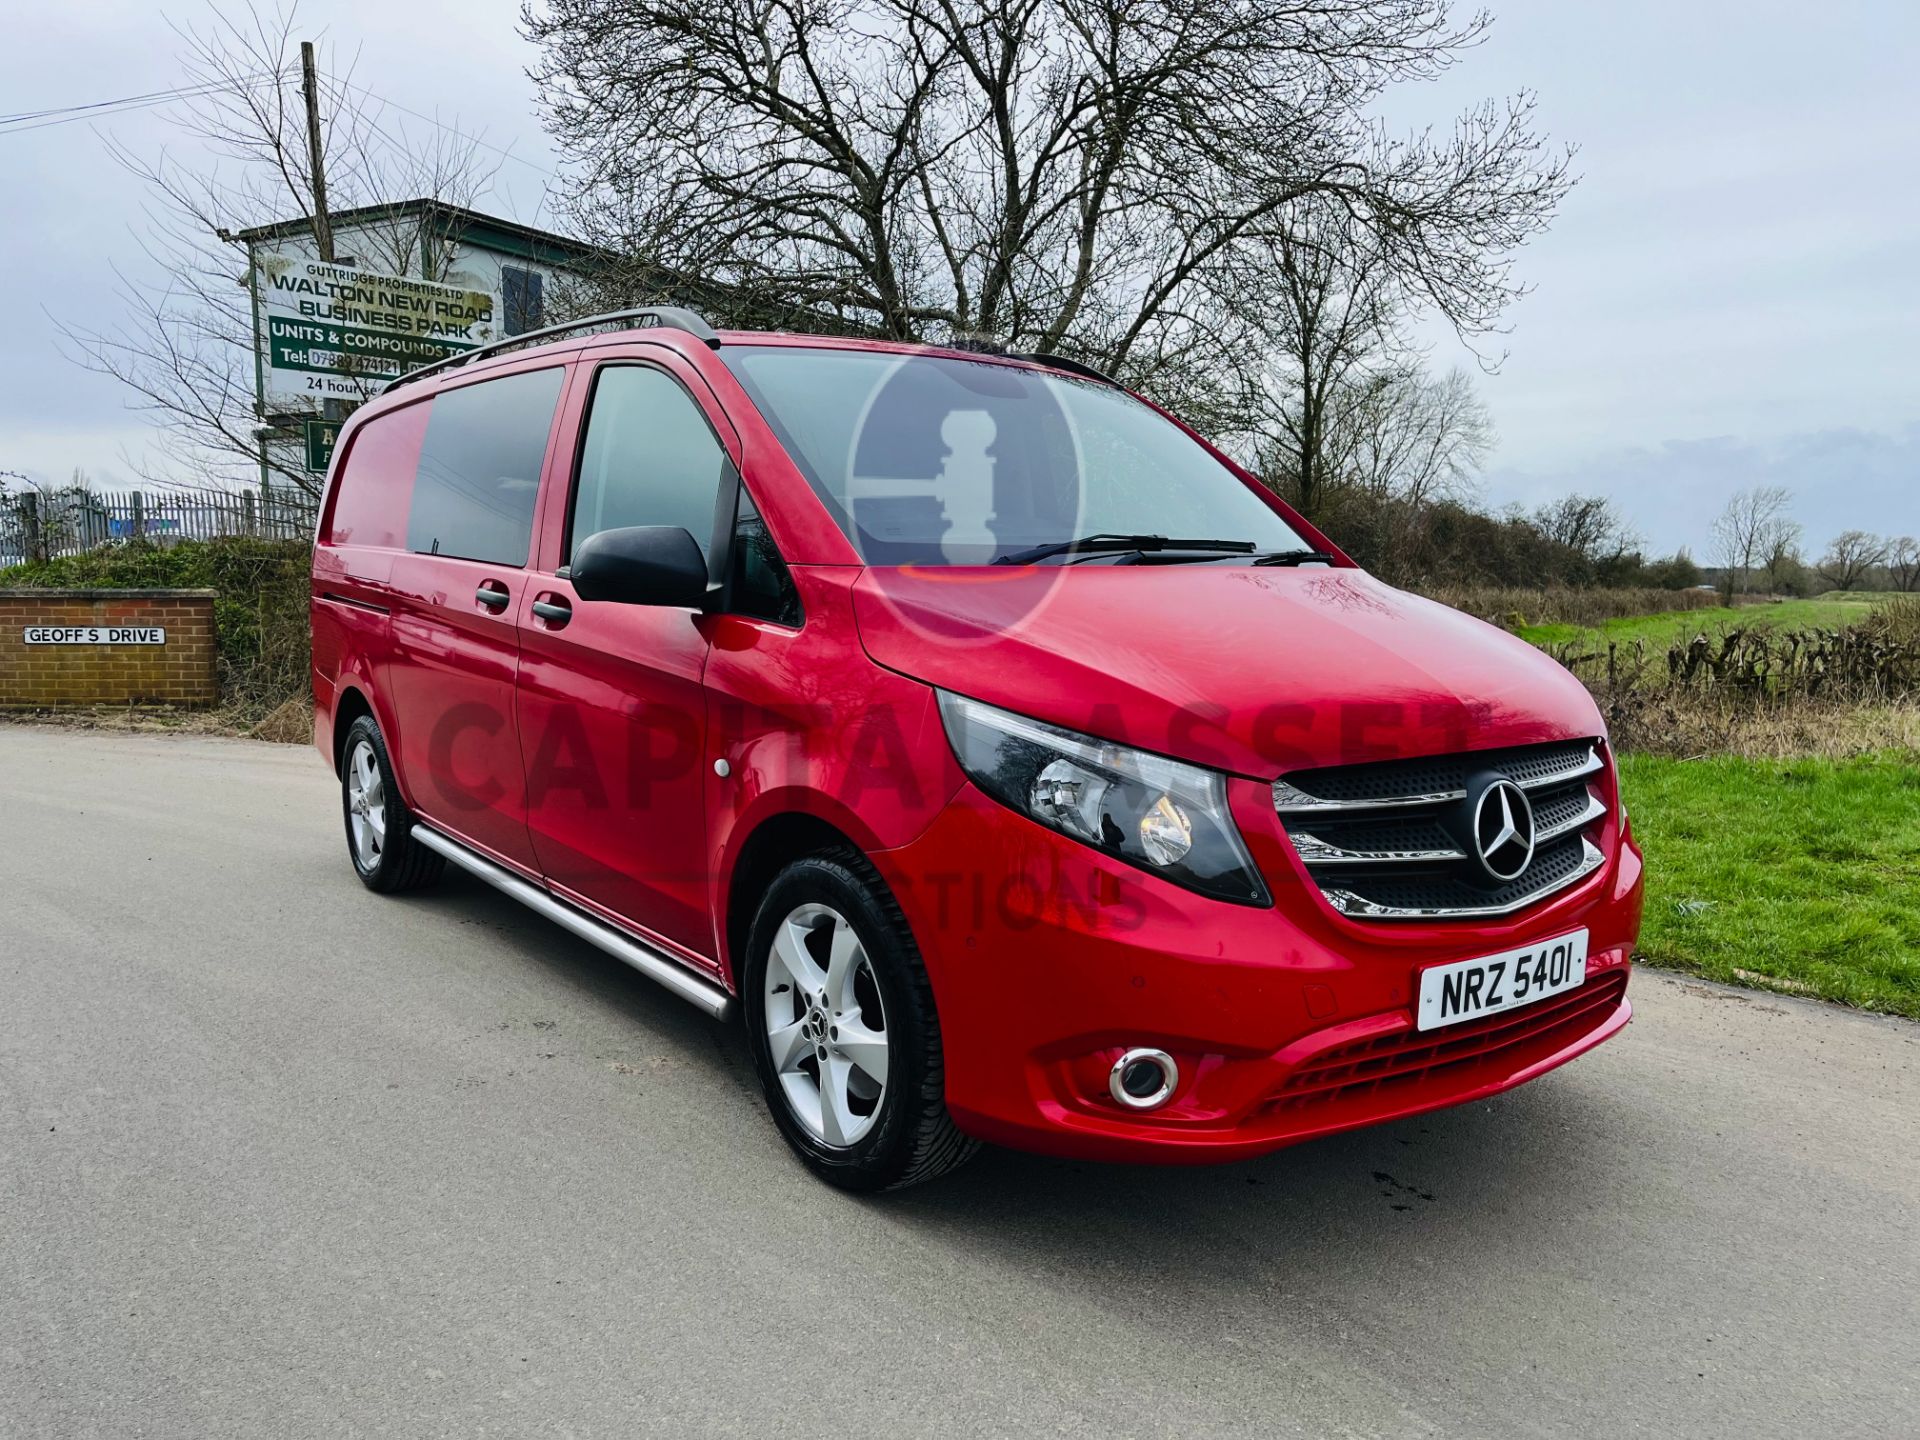 MERCEDES VITO 119CDI "SPORT" 7G-AUTO LWB DUALINER / 5 SEATER (2018 REG) ONLY 28K MILES (NO VAT) - Image 3 of 35